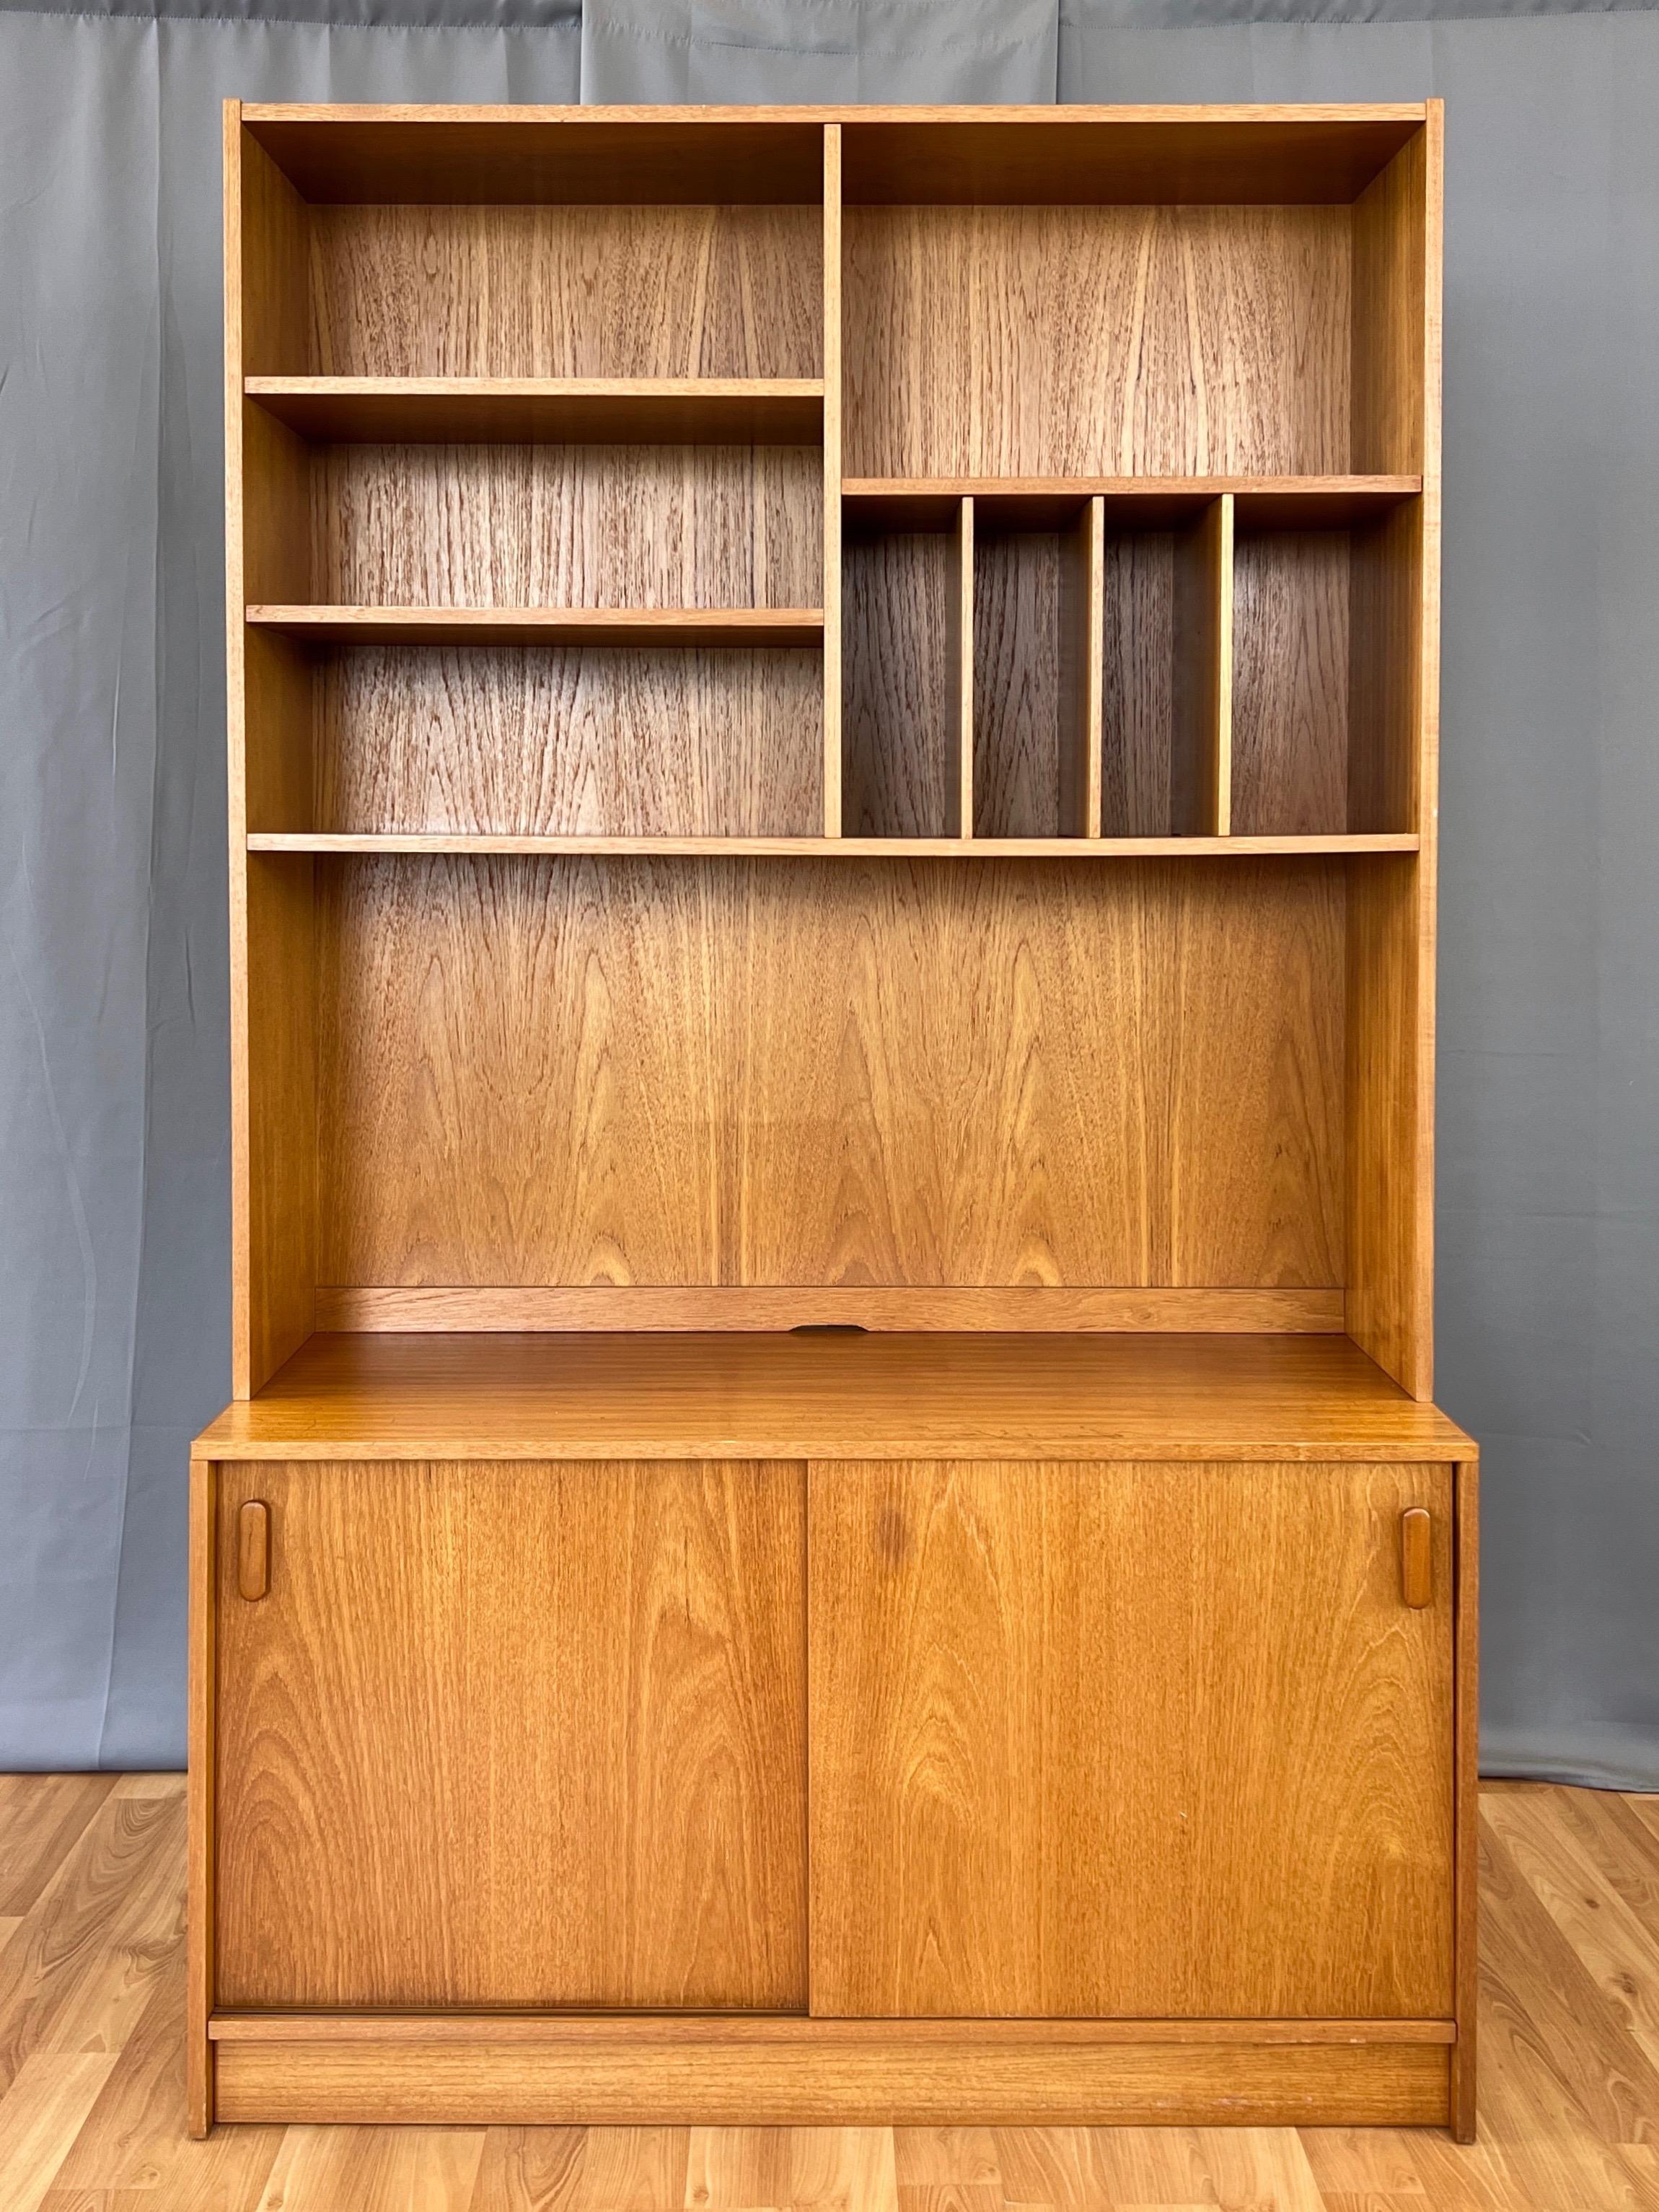 A 1970s Poul Hundevad-style tall Danish modern teak hutch with bookcase and cabinet by UP Møbelfabrik.

Upper portion with a variety of 11.5-inch-deep spaces perfect for books, collectibles, curios, and the like. Largest bottom space features a